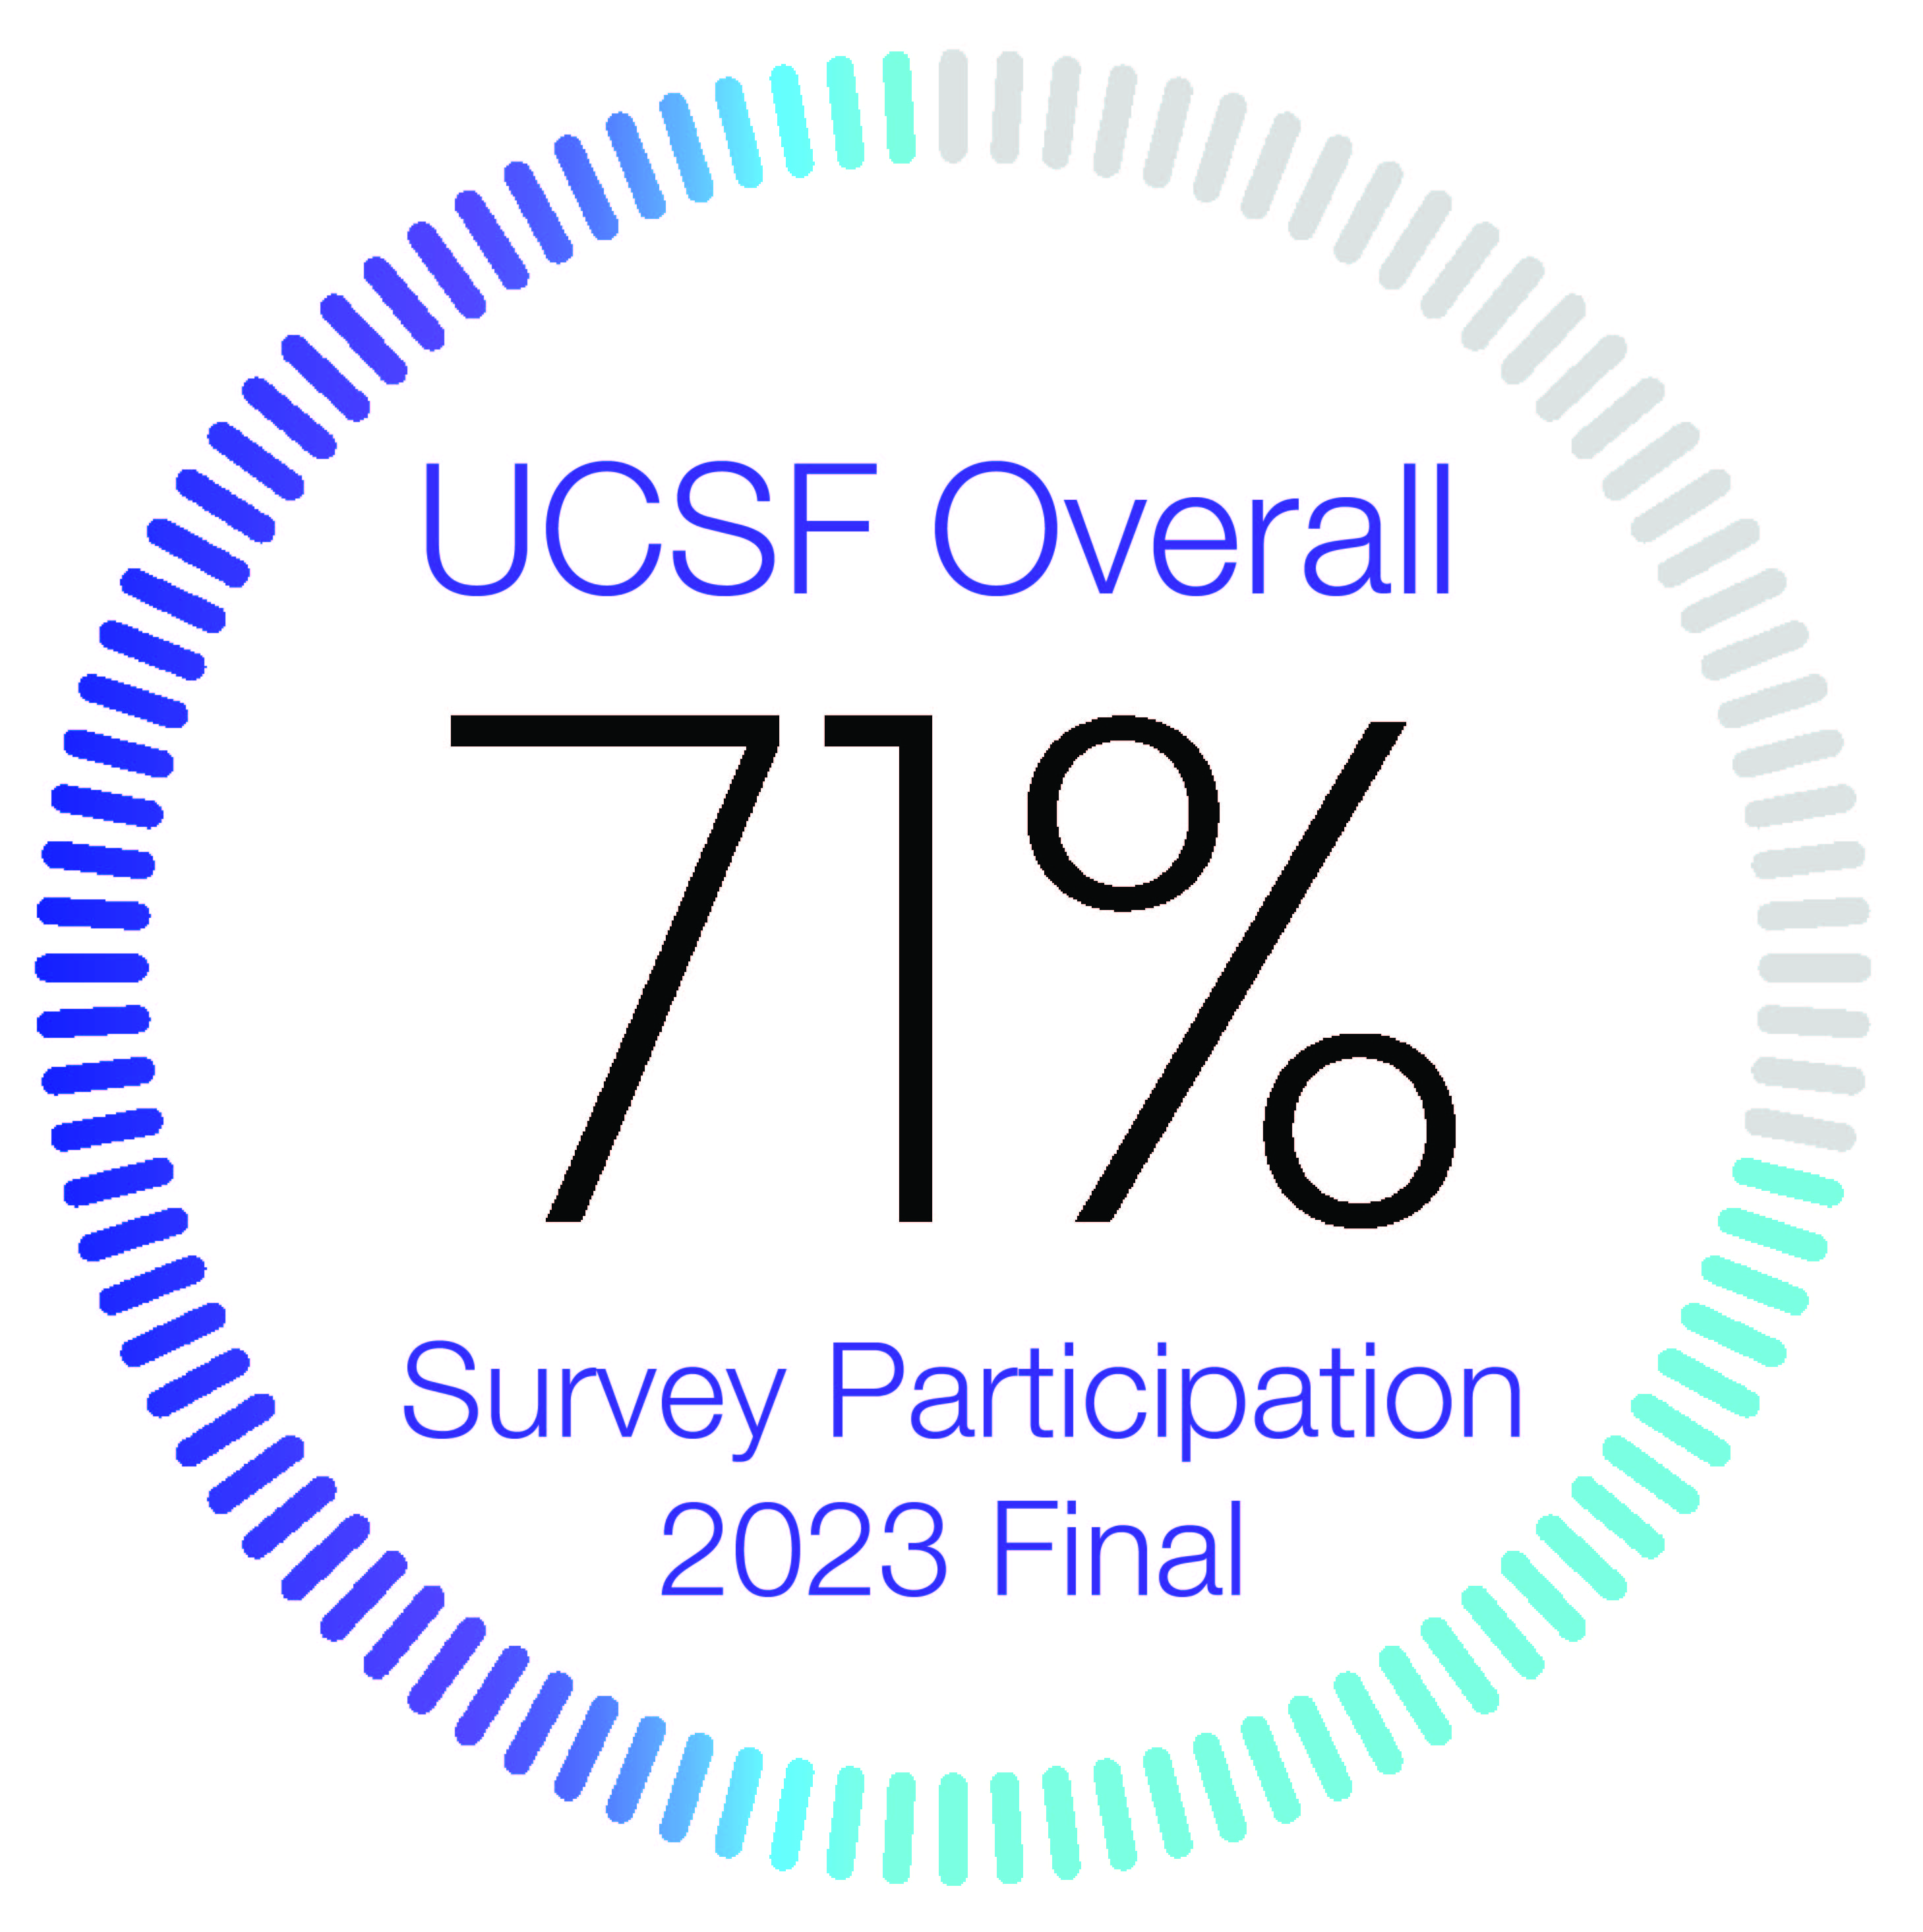 UCSF Overall Survey Participation 2023 Final Rate was 71%